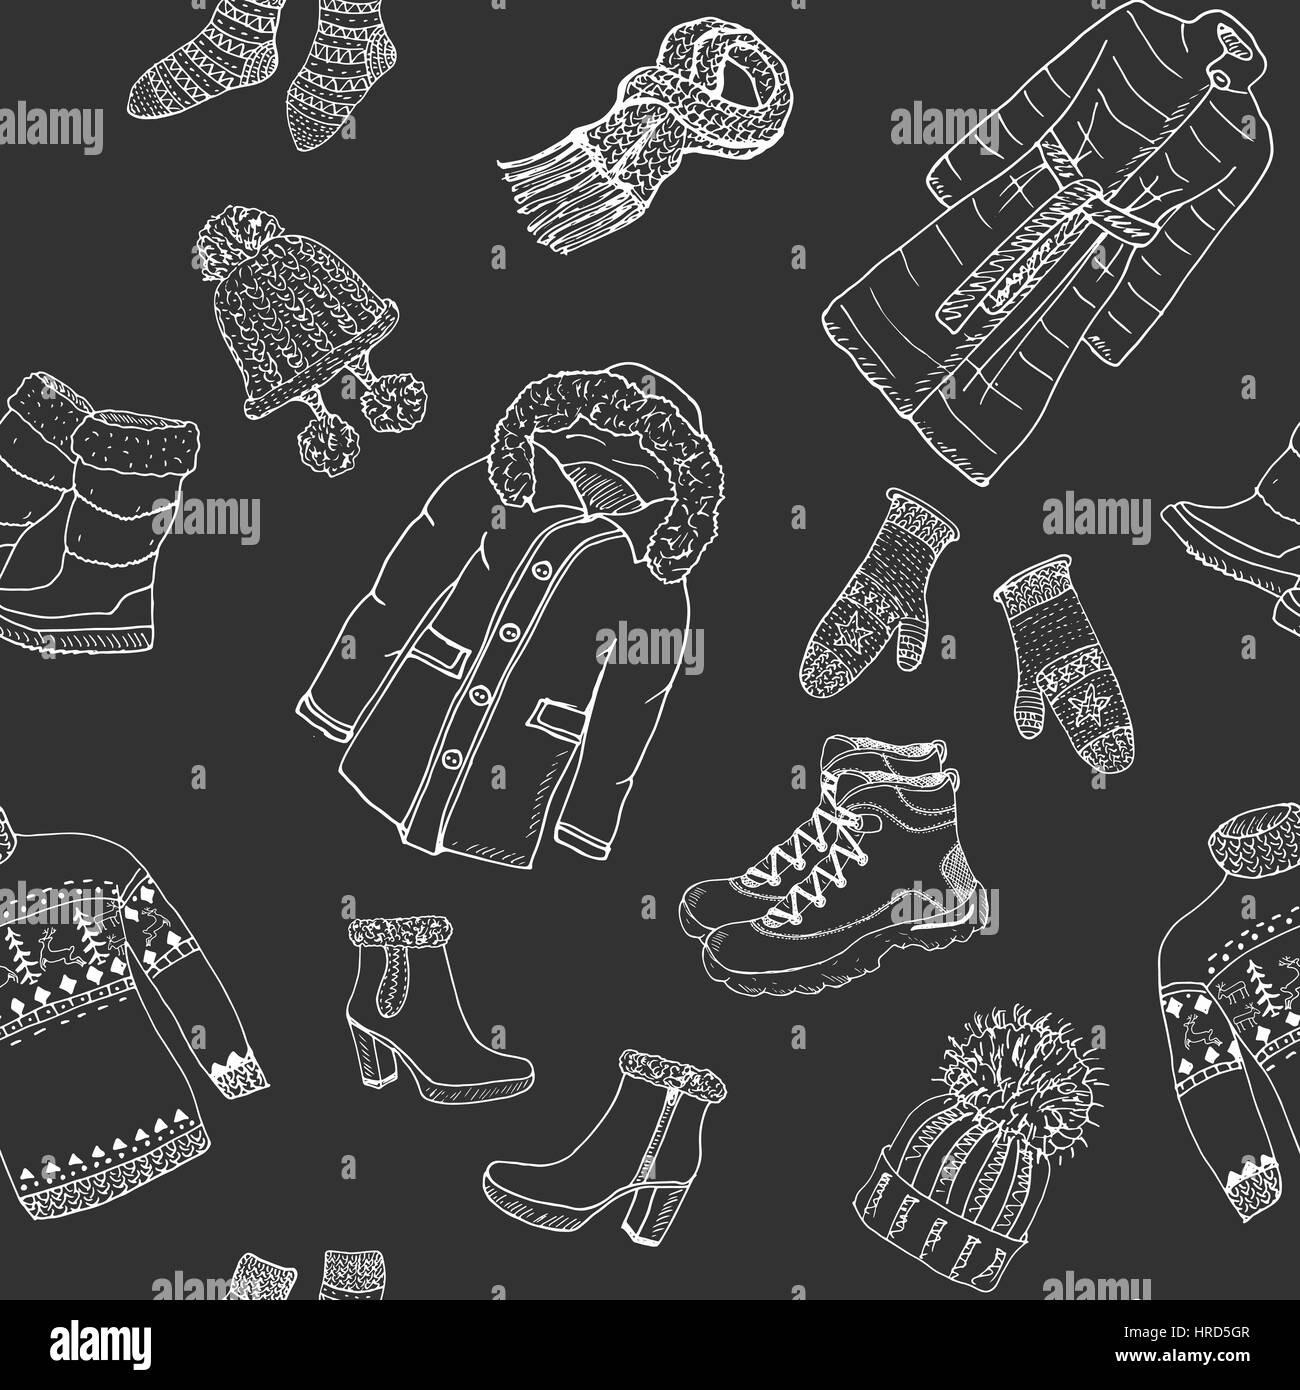 Winter season doodle clothes seamless pattern. Hand drawn sketch elements warm raindeer sweater, coat, boots, socks, gloves and hats. vector backgroun Stock Vector